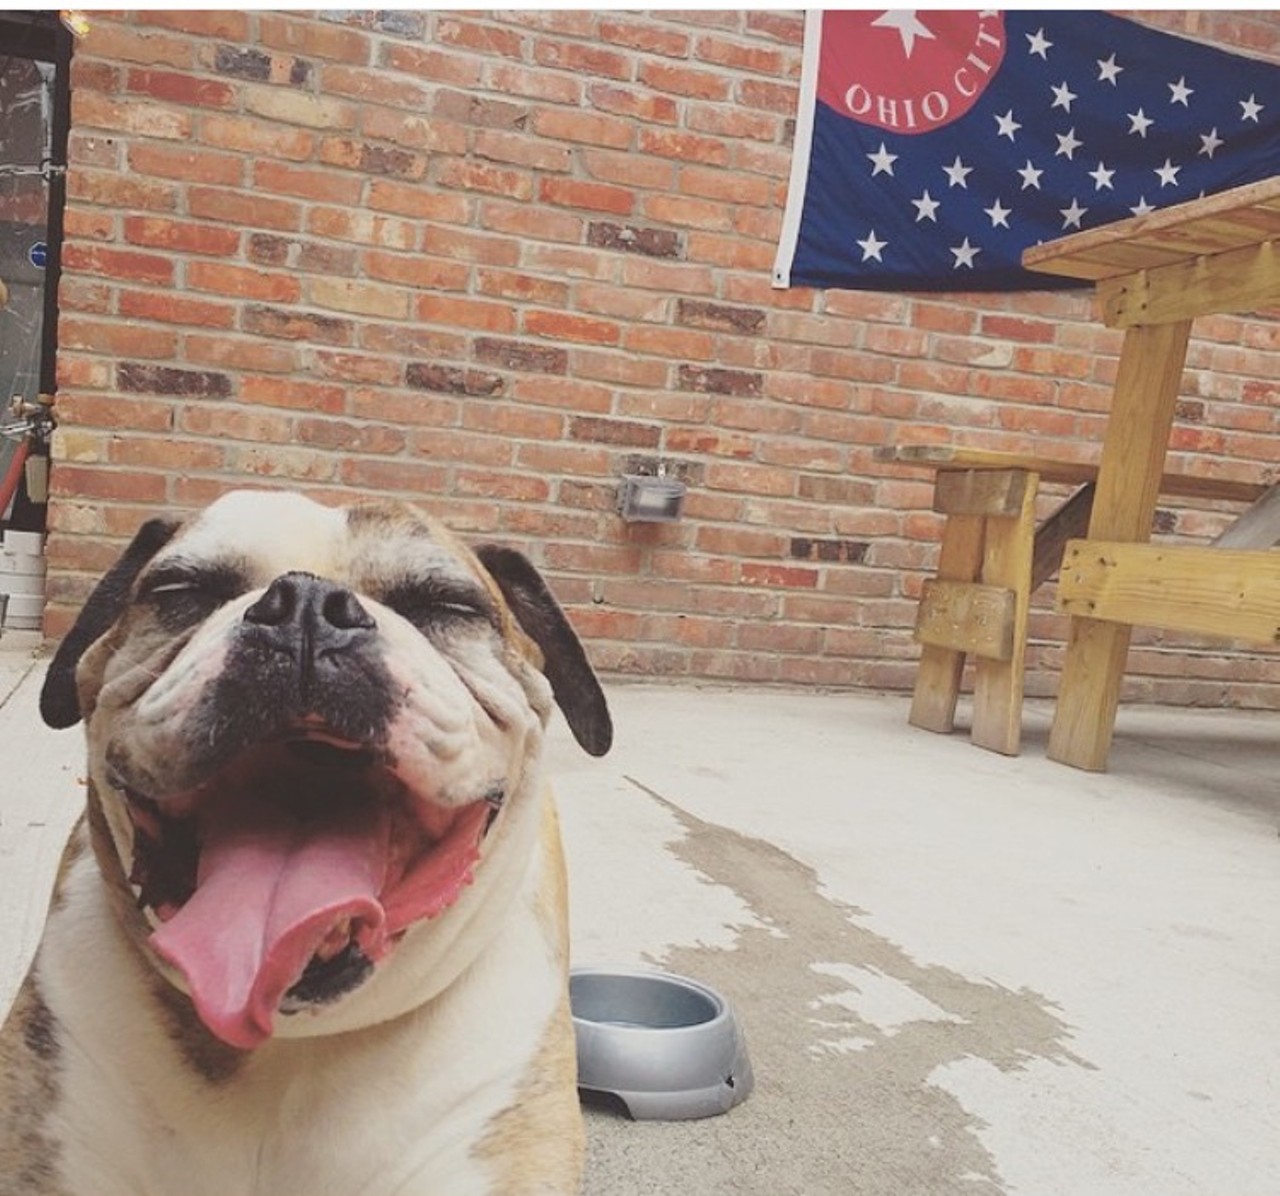 Jukebox
1404 W. 29th St.
This musical neighborhood spot in Ohio City welcomes all tail-waggers to their patio for cold beer, good tunes, food, and doggie-fun in their courtyard.
(Photo courtesy of Instagram user: Jukeboxcle)